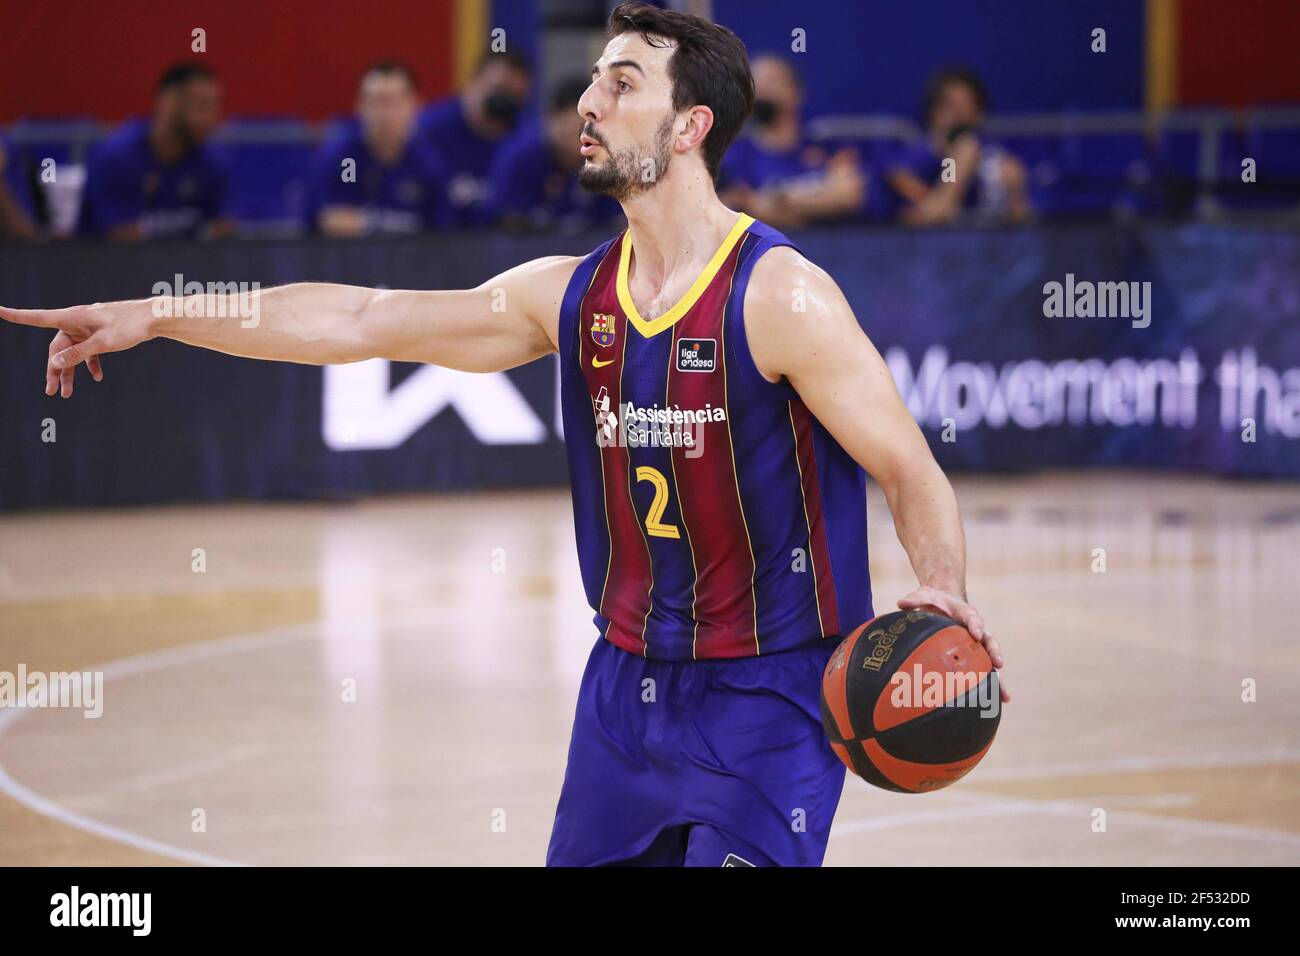 Barcelona, Spain. 23rd Mar, 2021. March 23, 2021, Barcelona, Catalonia, Spain: Leo Westermann during the match betweeen FC Barcelona and Estudiantes, corresponding to the week 20 of the Liga Endesa, played at the Palau Blaugrana. Photo: JGS/Cordon Press Credit: CORDON PRESS/Alamy Live News Stock Photo